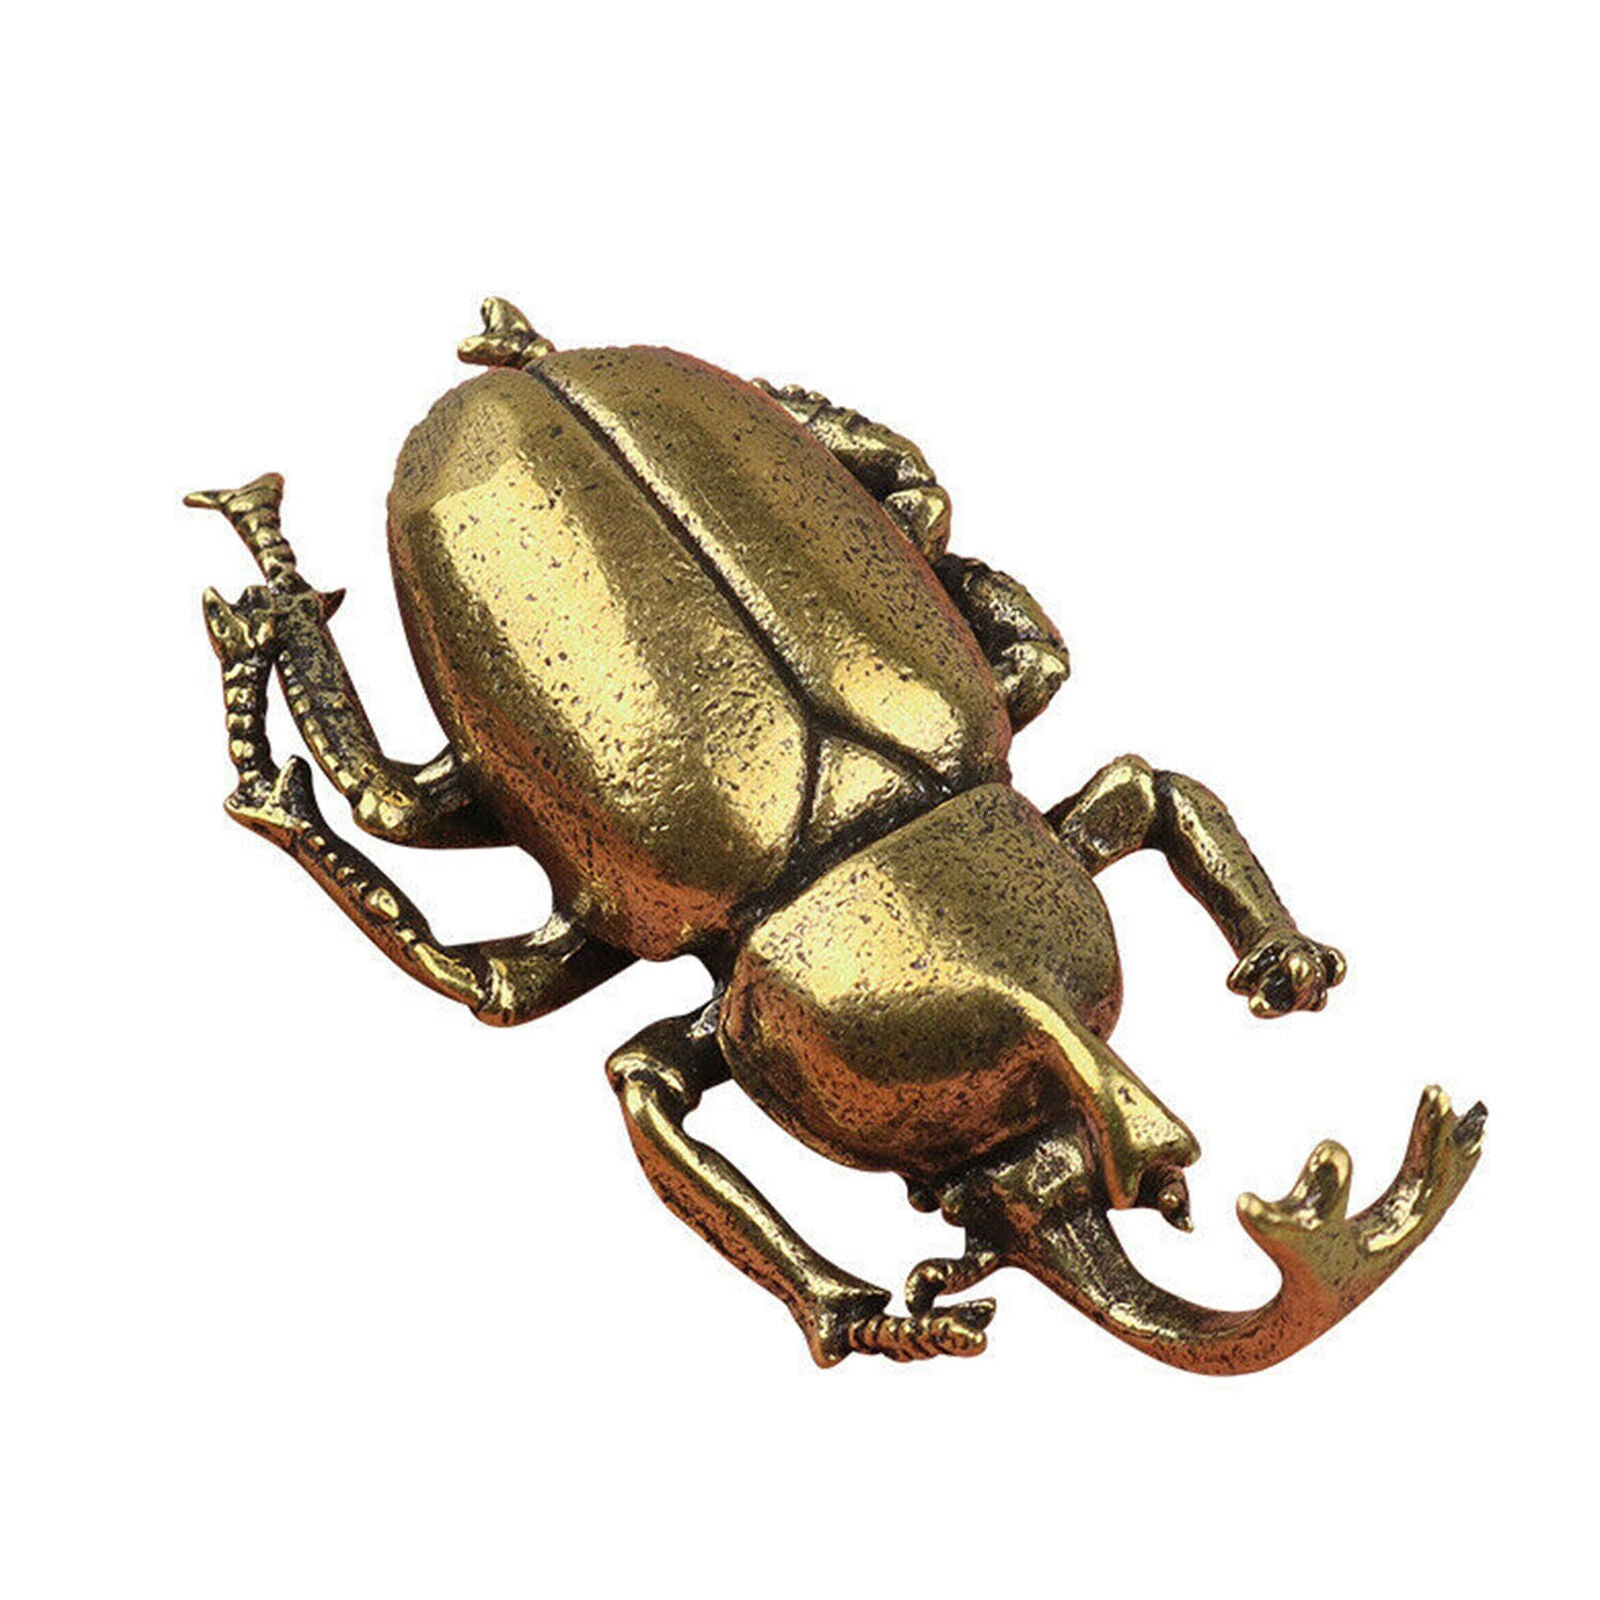 Brass Insect Decorative Crafts Statue House Ornaments Animal Gifts